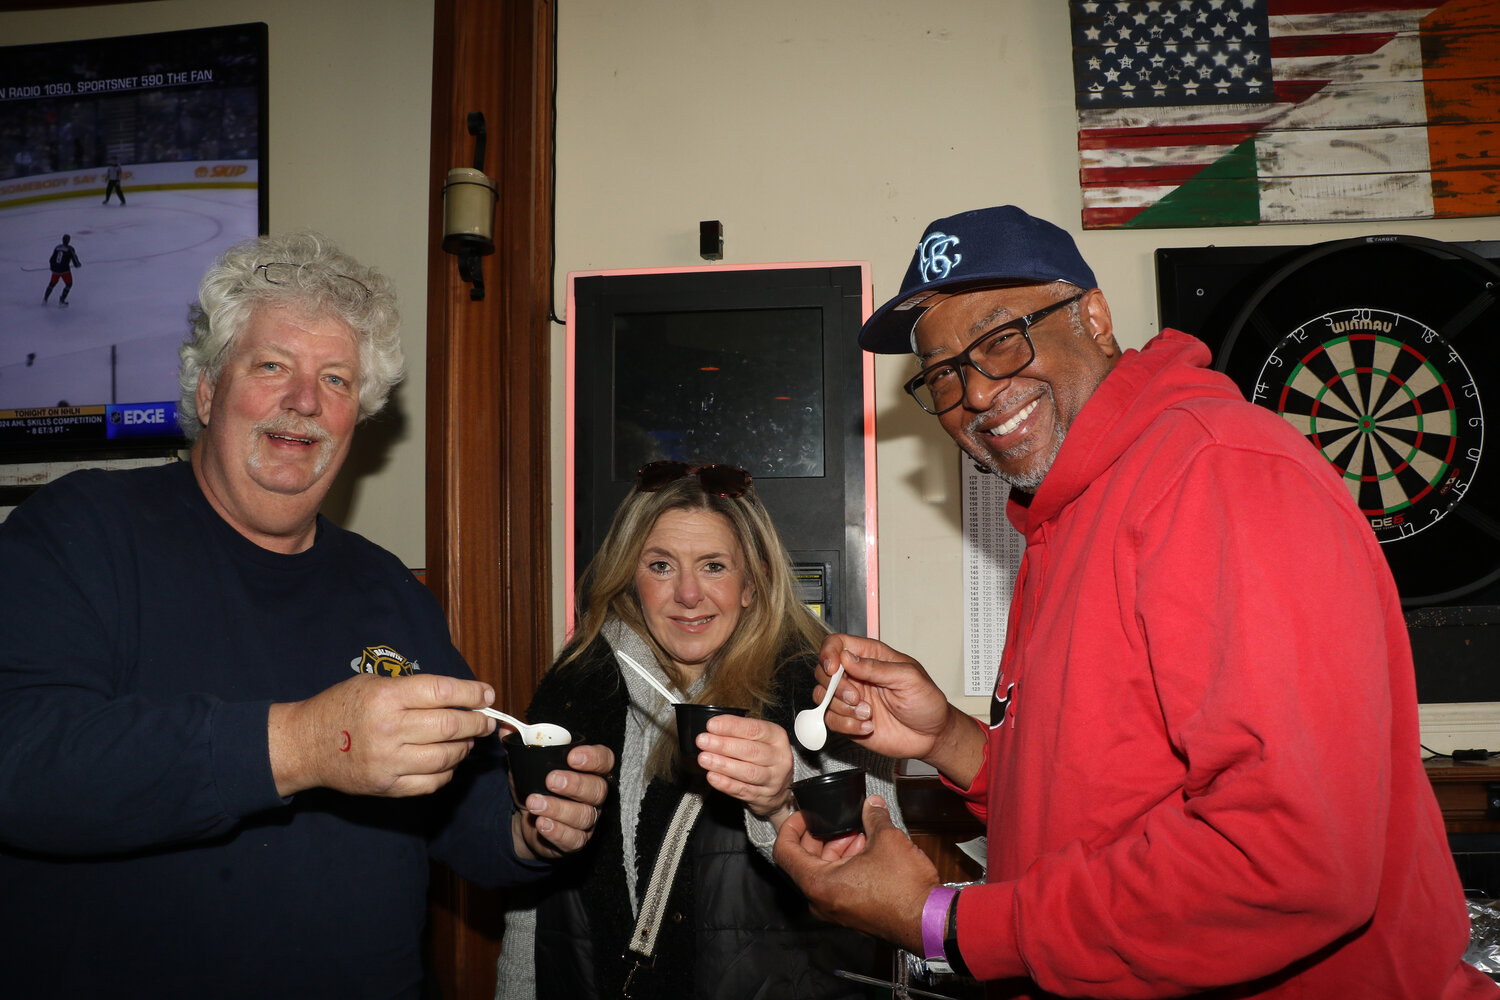 Friends John Cools, Jessica Saracco, and Chris McCleese gathering at the pub as they enjoy the warmth and taste of the chili.